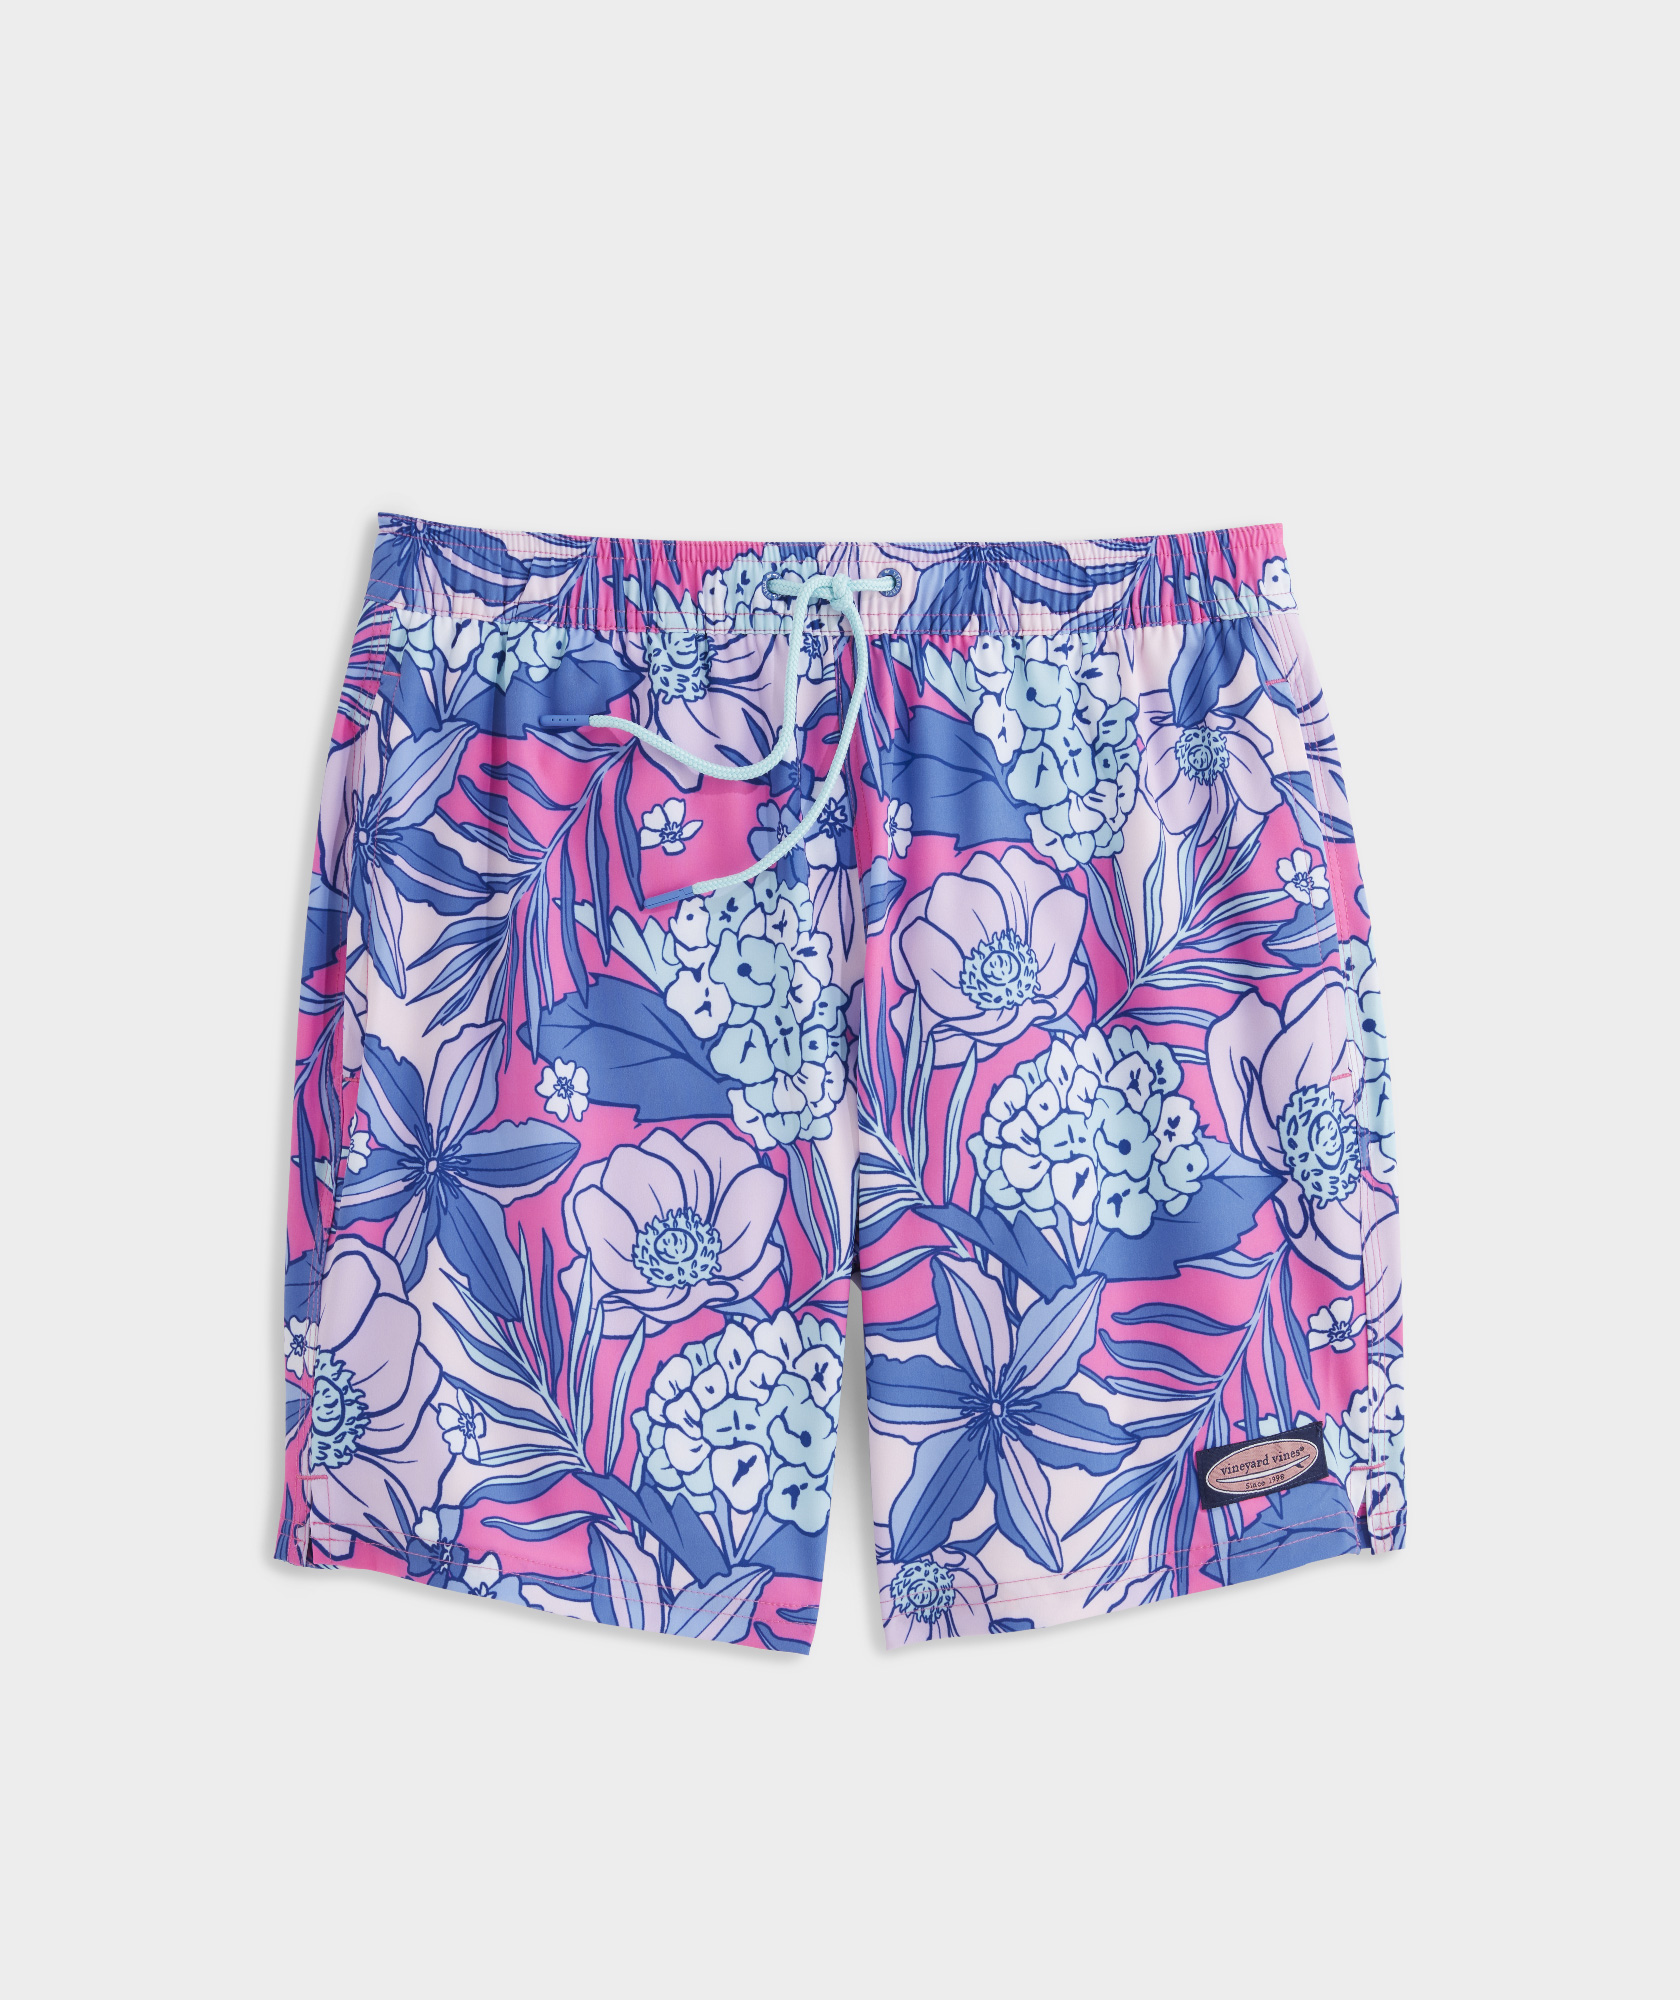 Shop 7 Inch Printed Chappy Trunks at vineyard vines